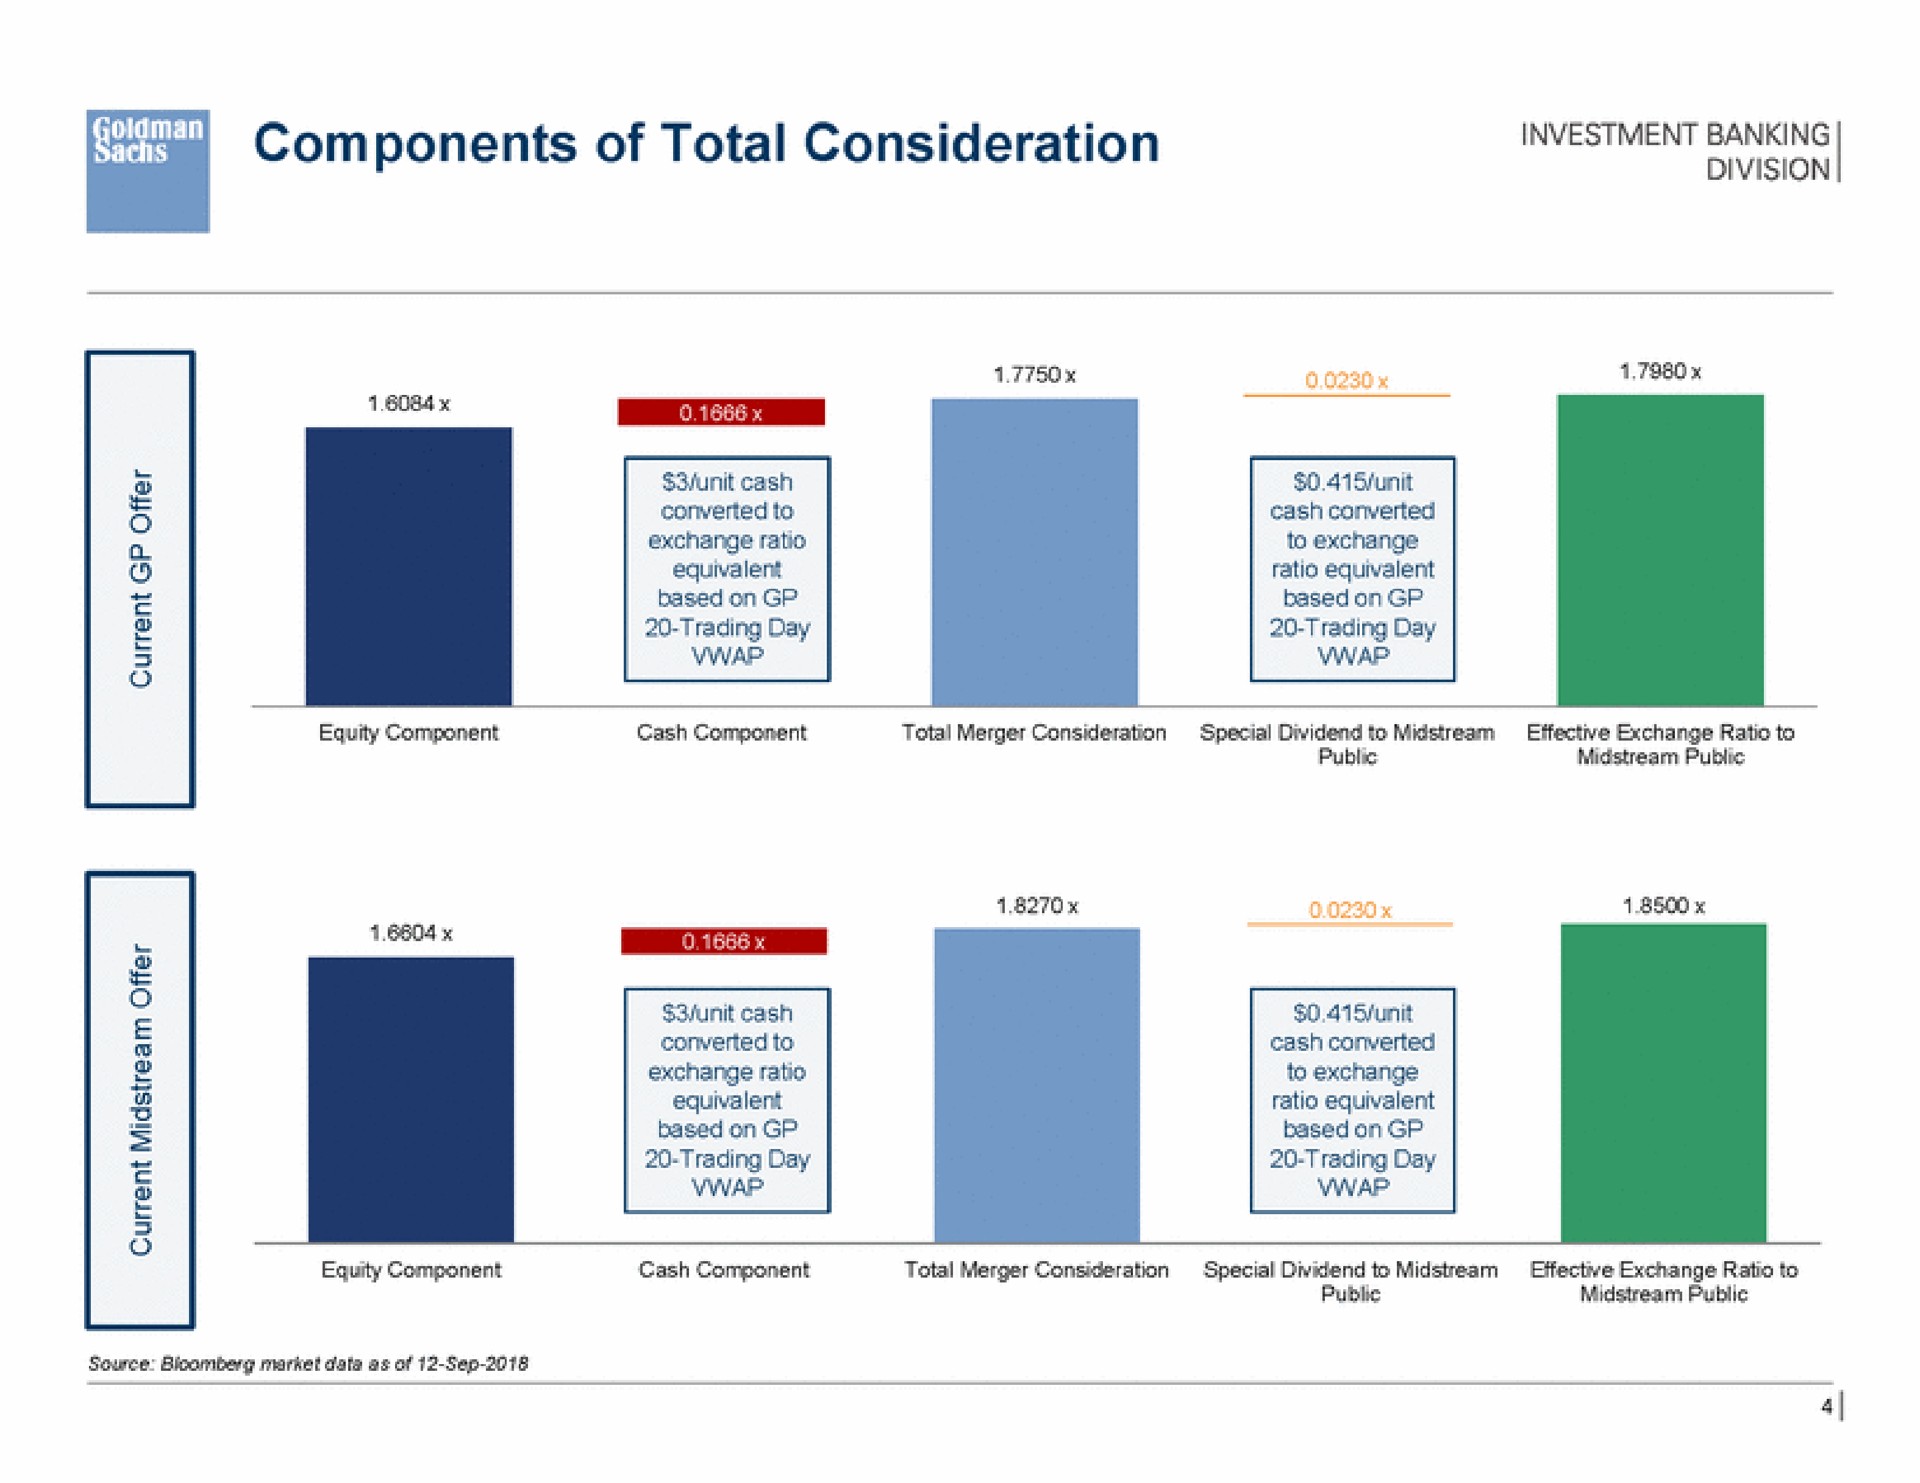 components of total consideration | Goldman Sachs